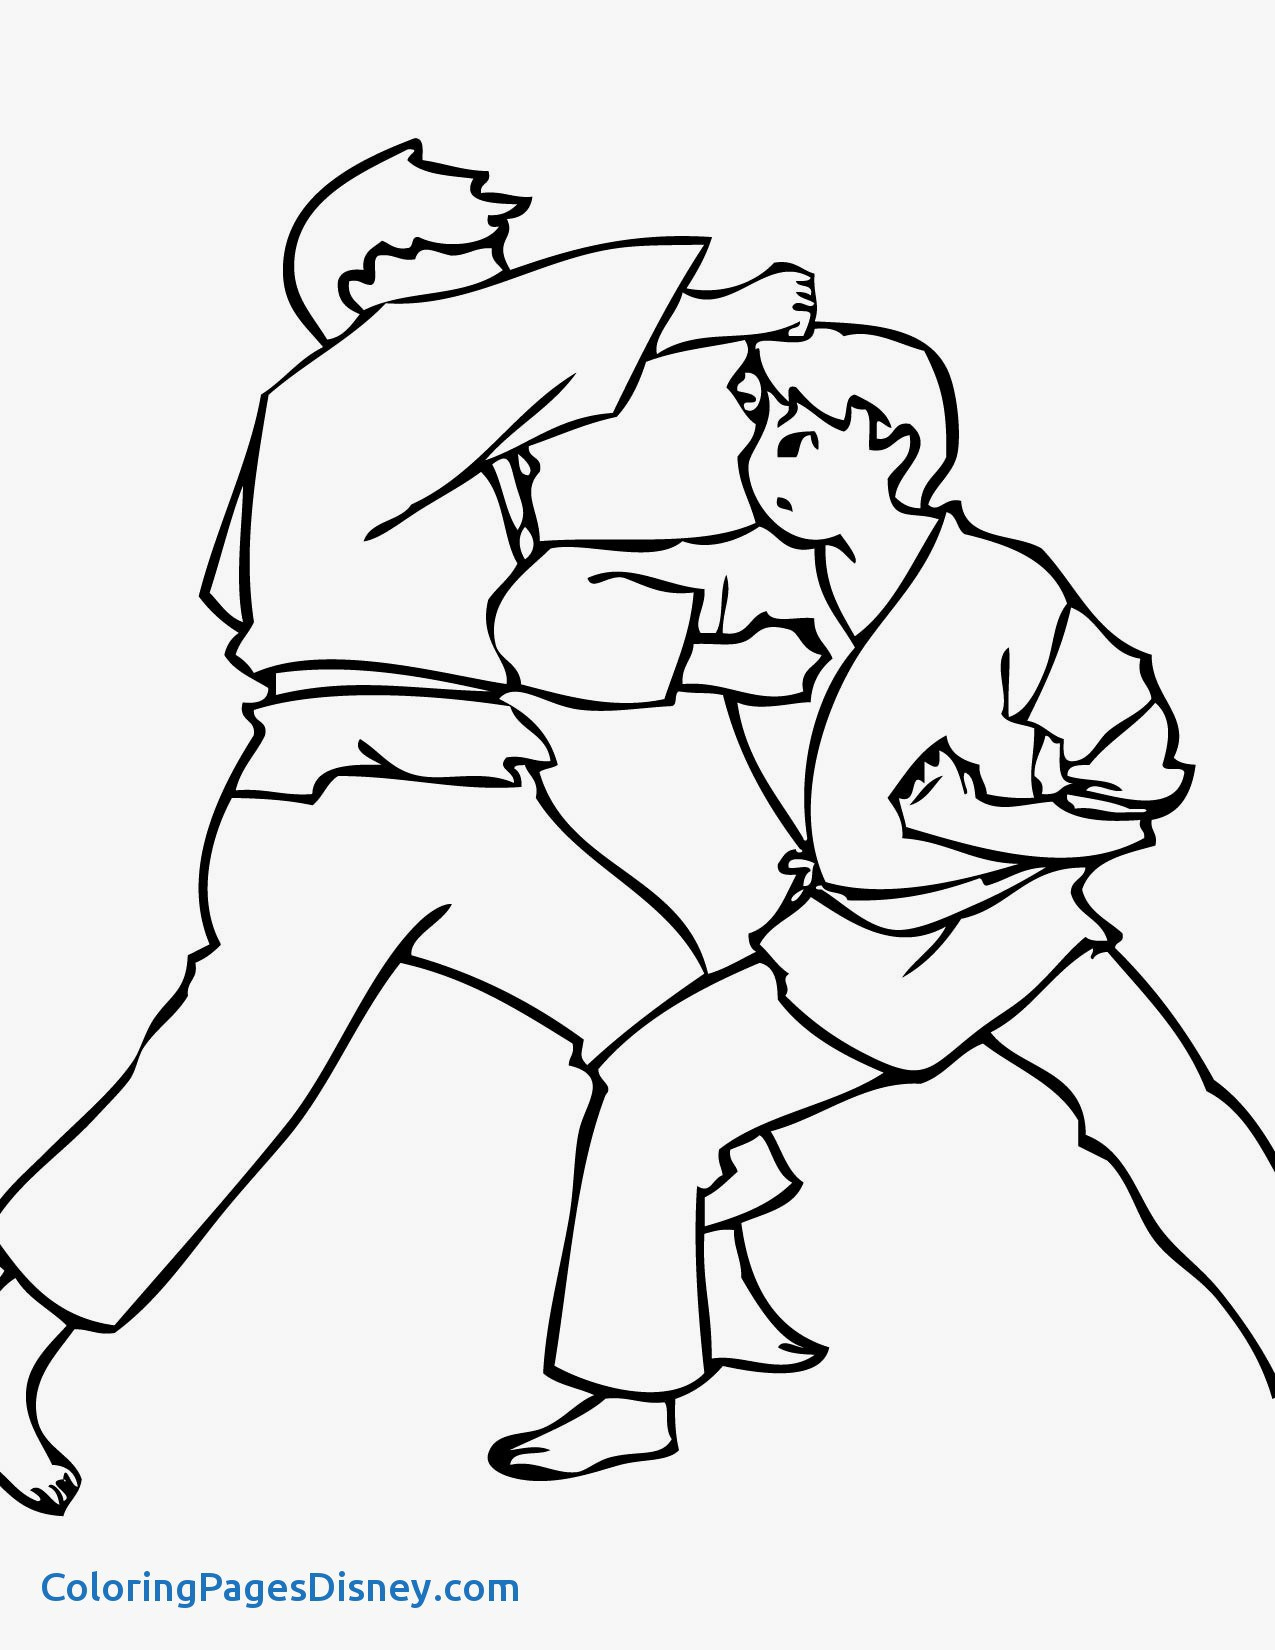 Karate Coloring Pages 8 #2124 - Free Printable Karate Coloring Pages